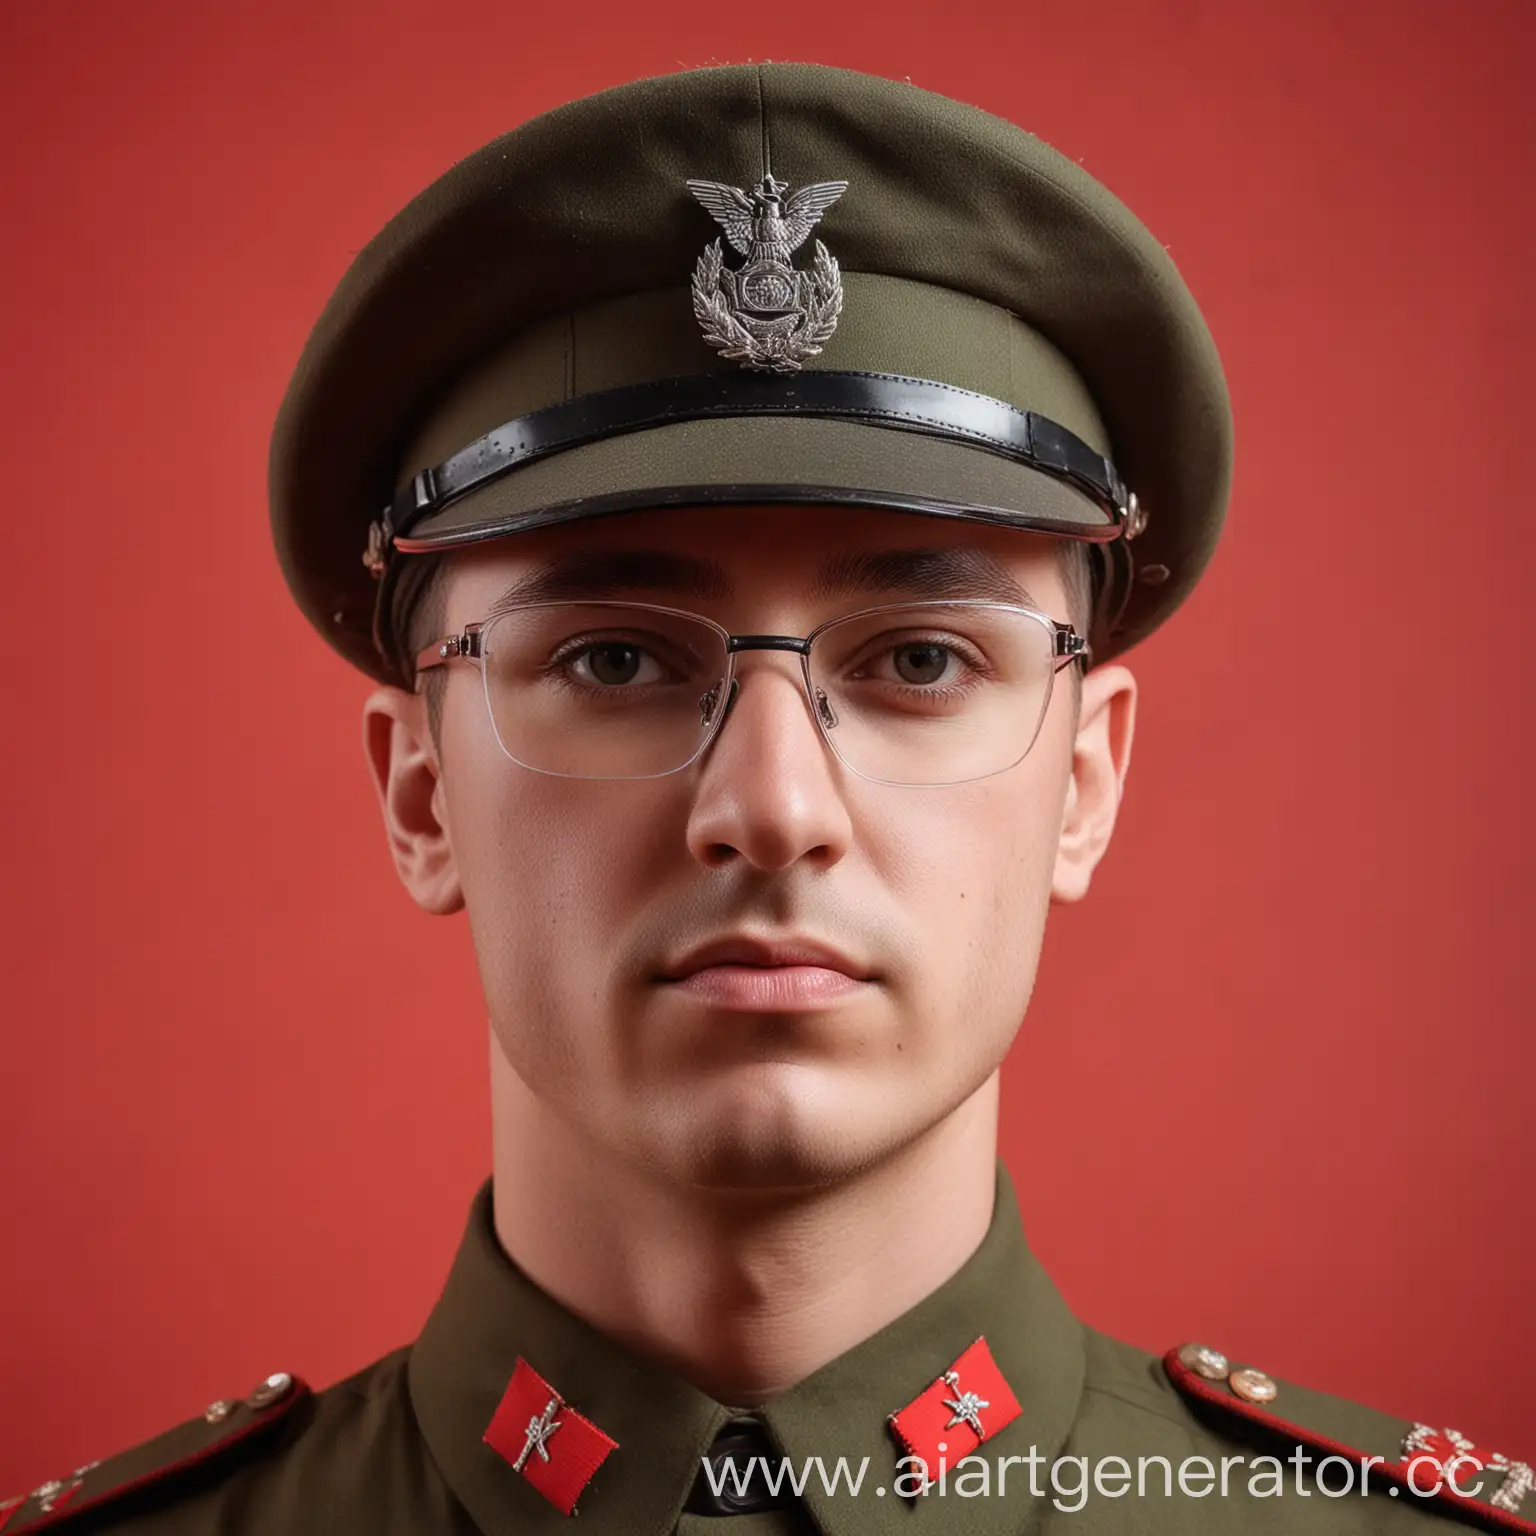 Soldier-in-Glasses-on-Victory-Day-Red-Background